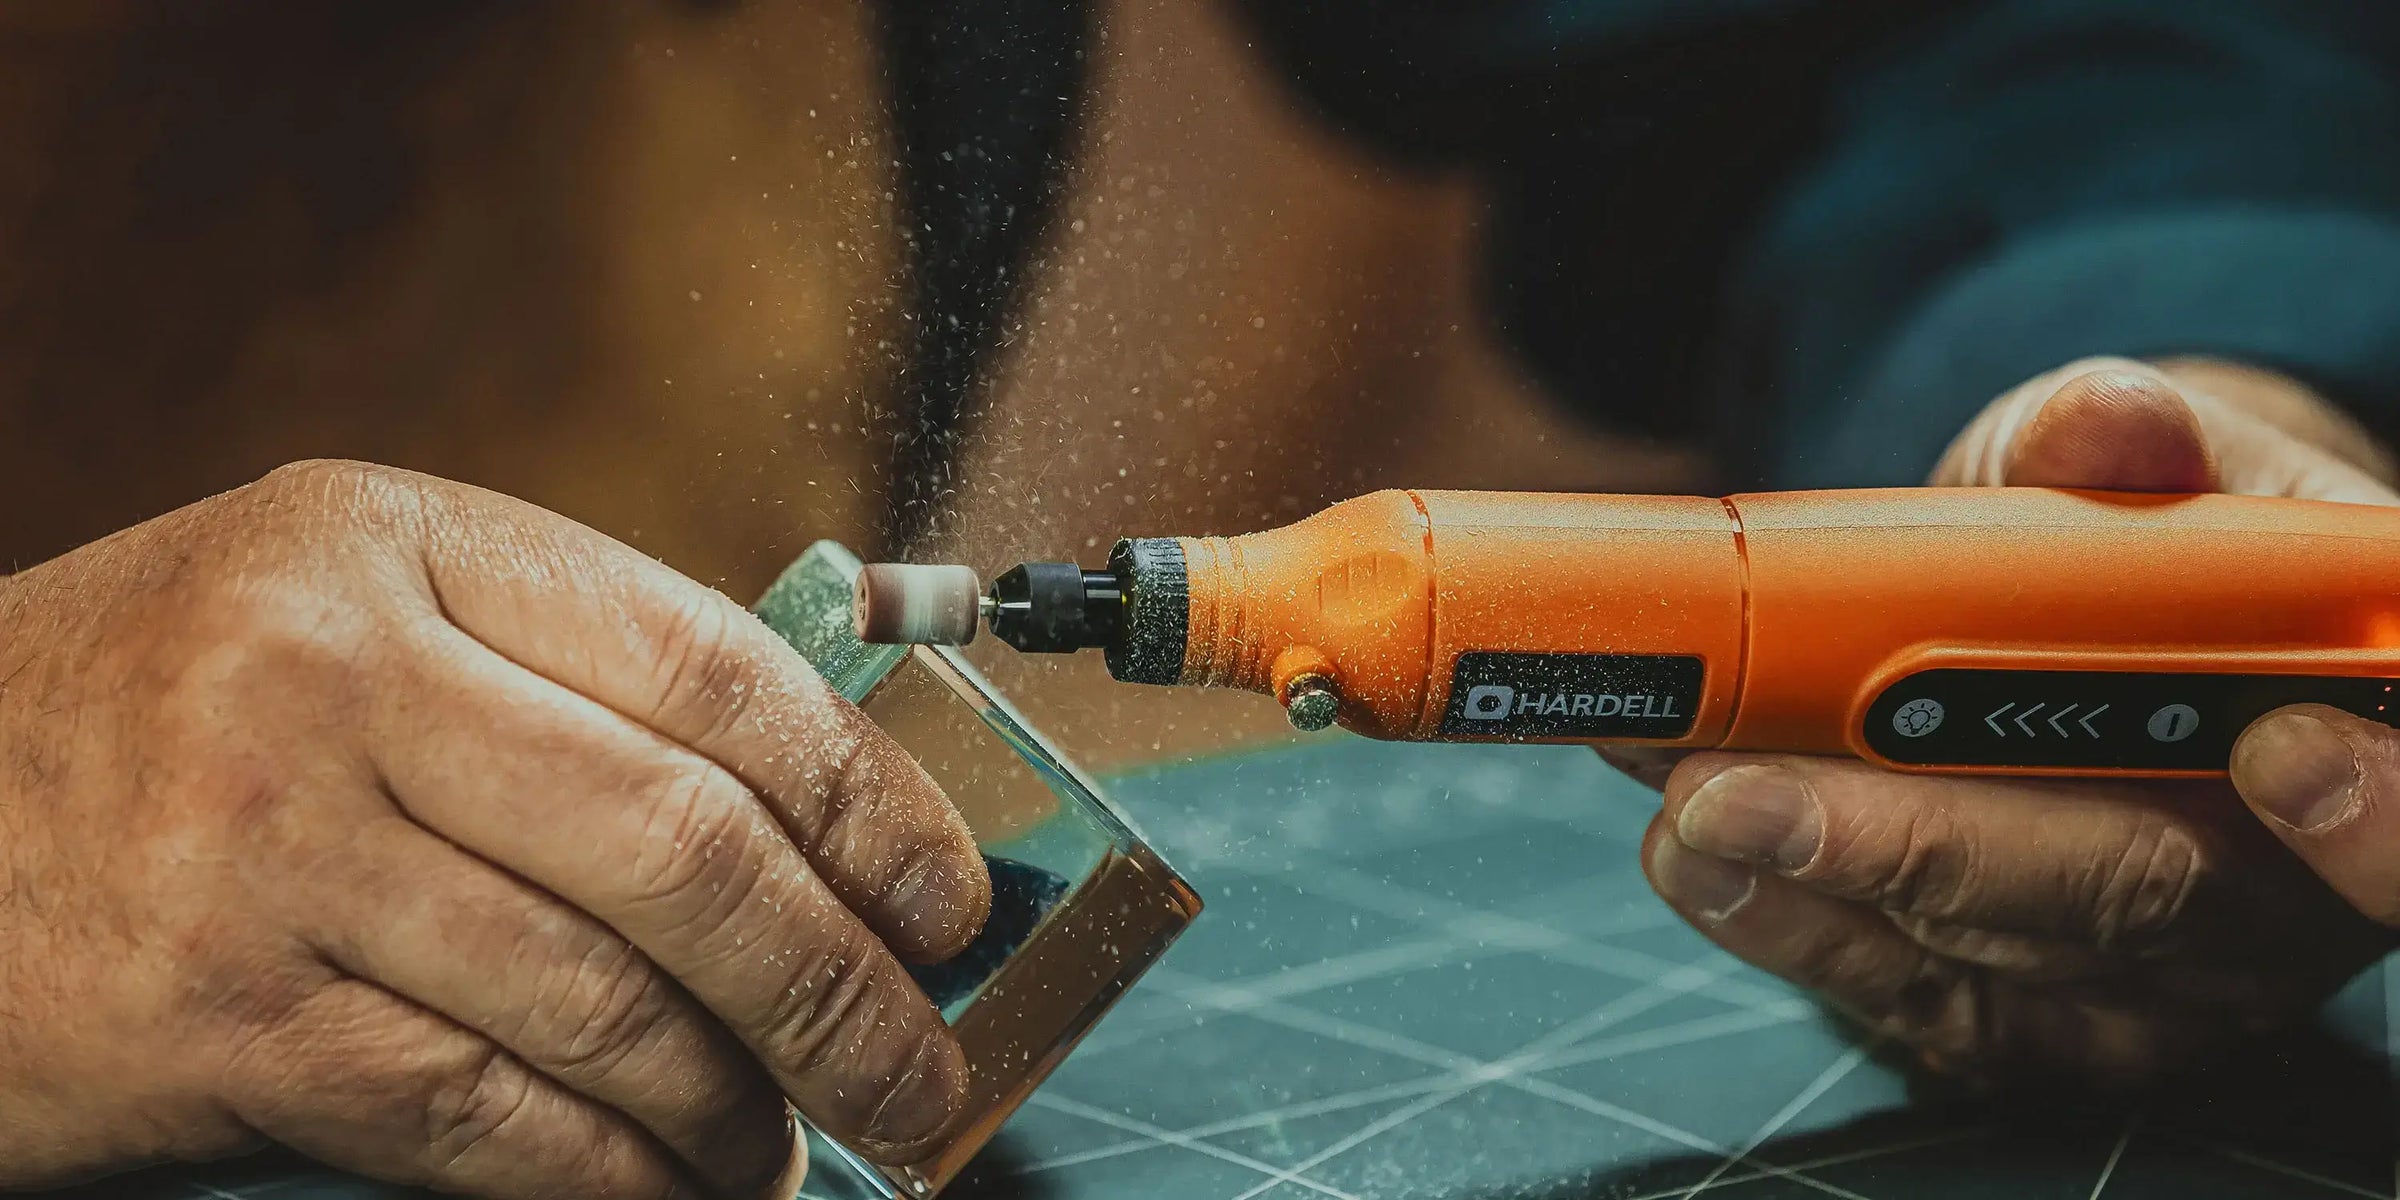 Dremel on Instagram: Elevate your cleaning with high speed action